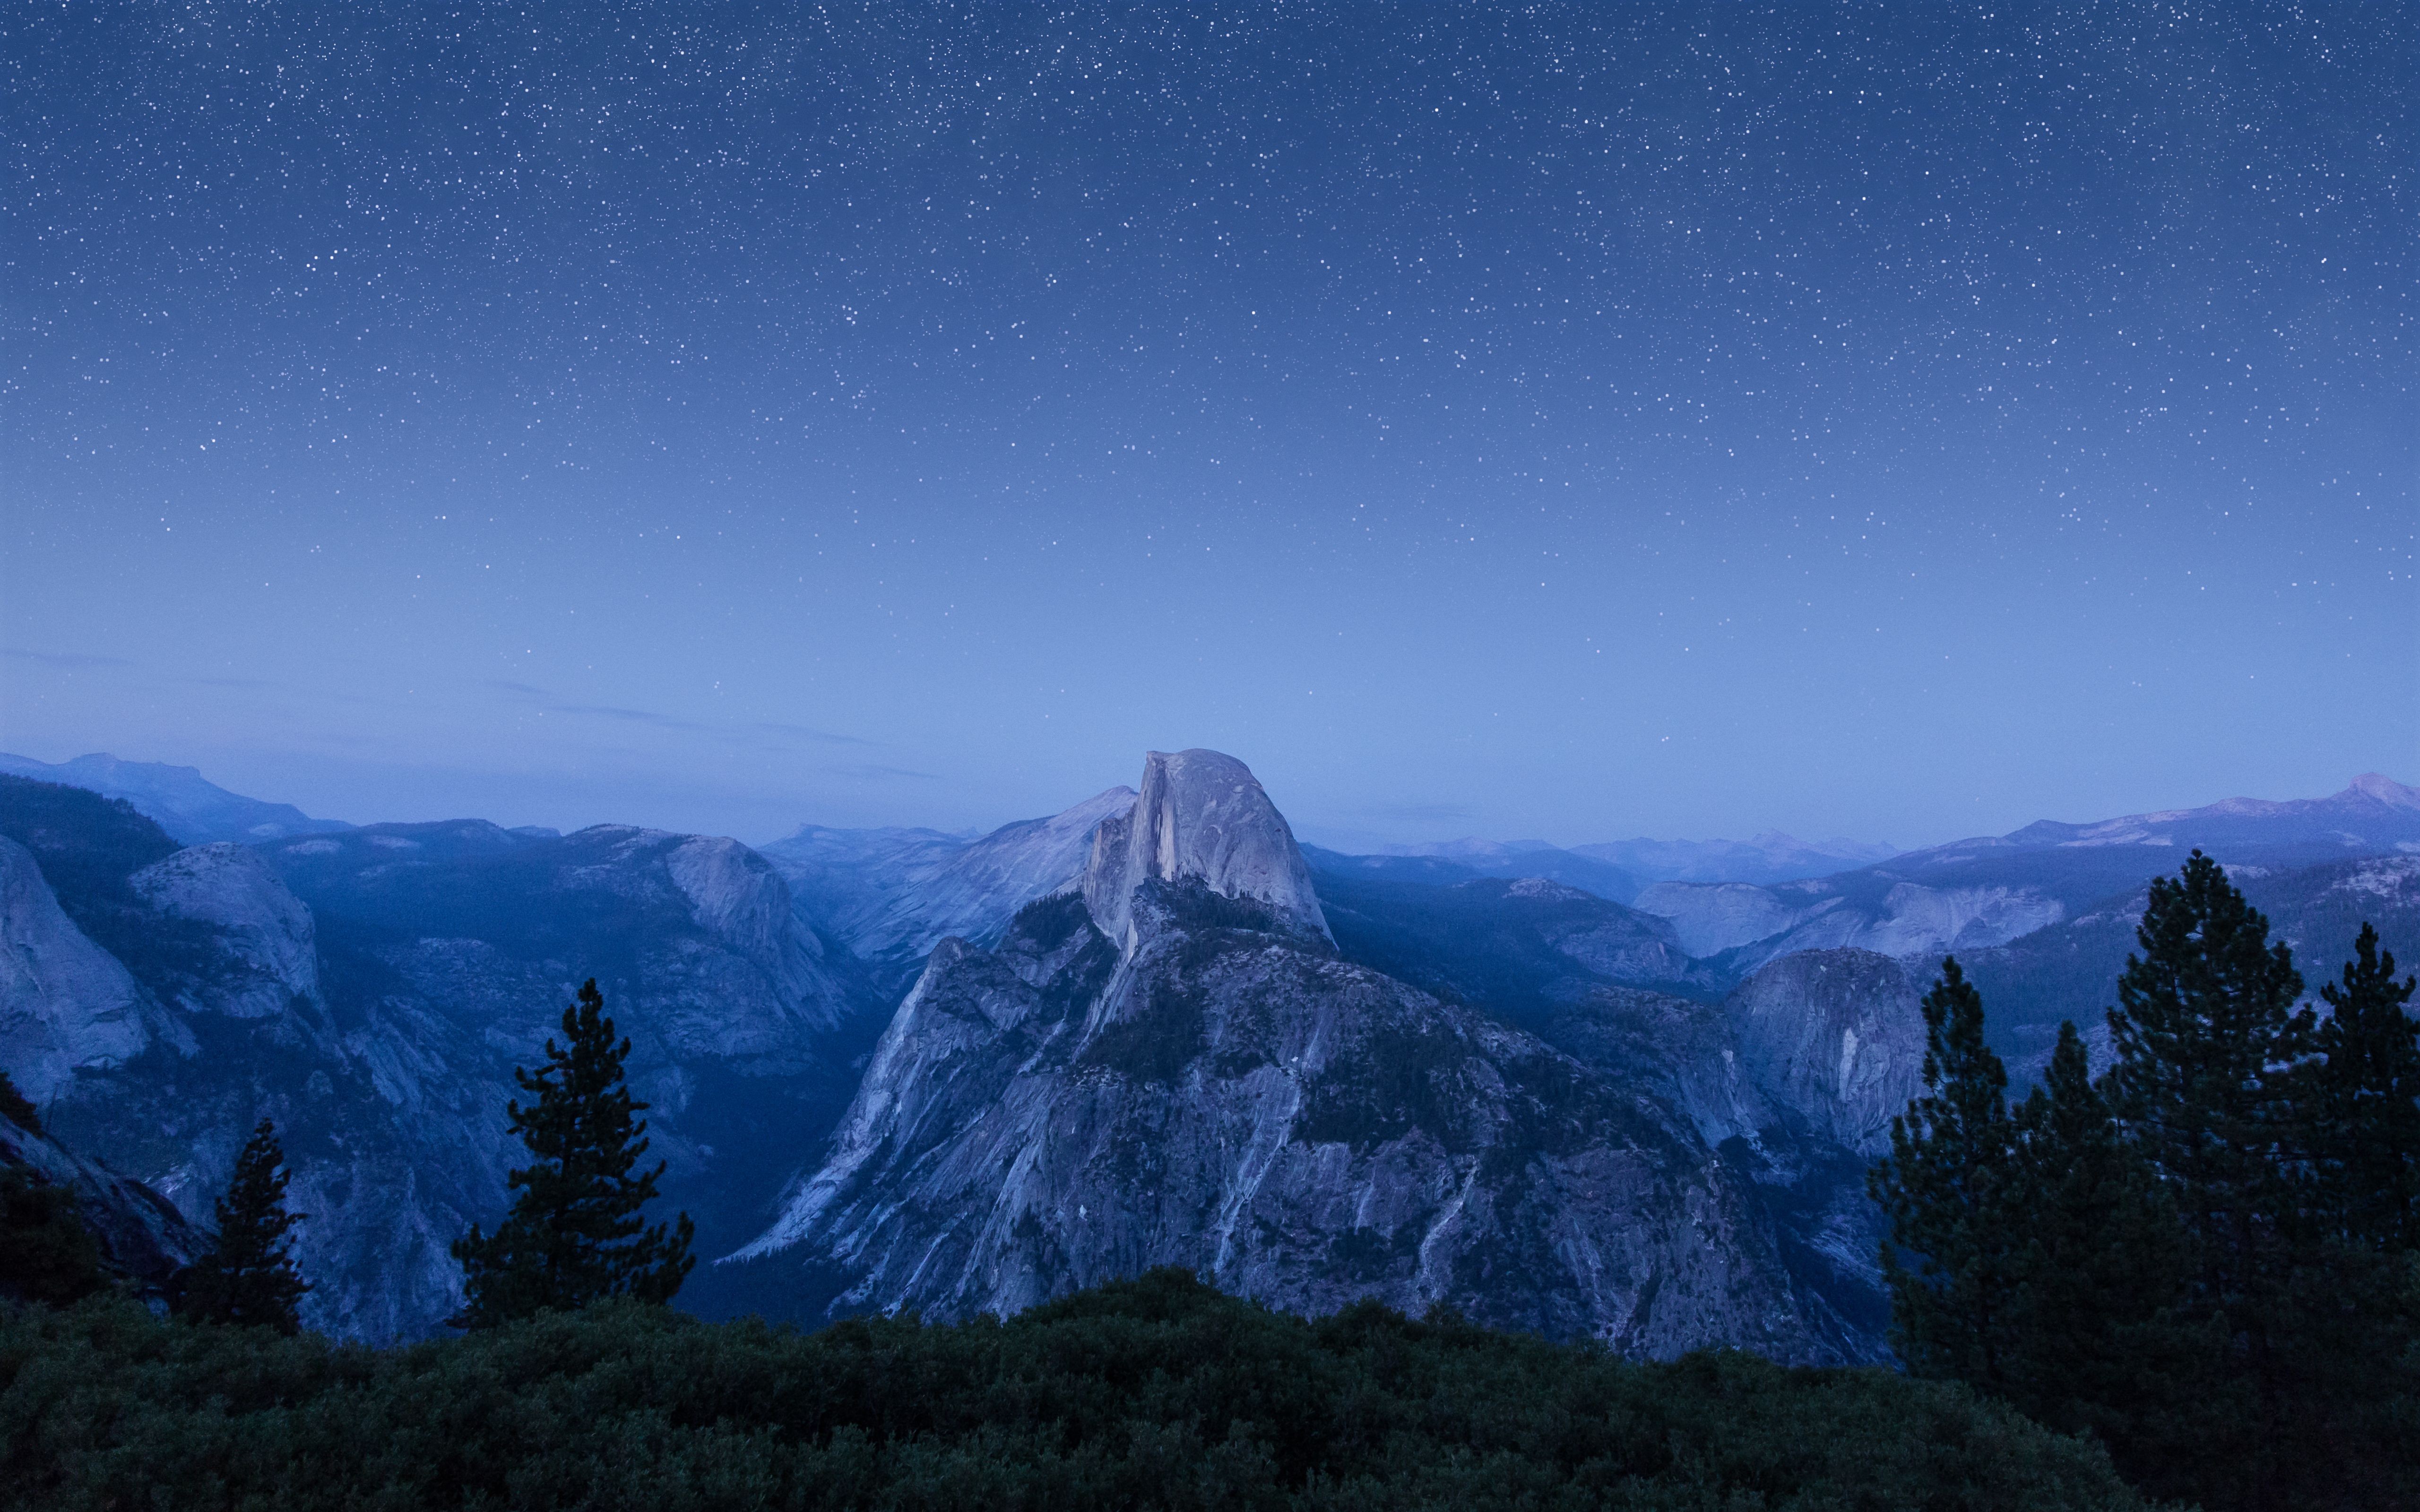 General 5120x3200 landscape mountains Half Dome Yosemite National Park stars starry night nature outdoors California USA low light